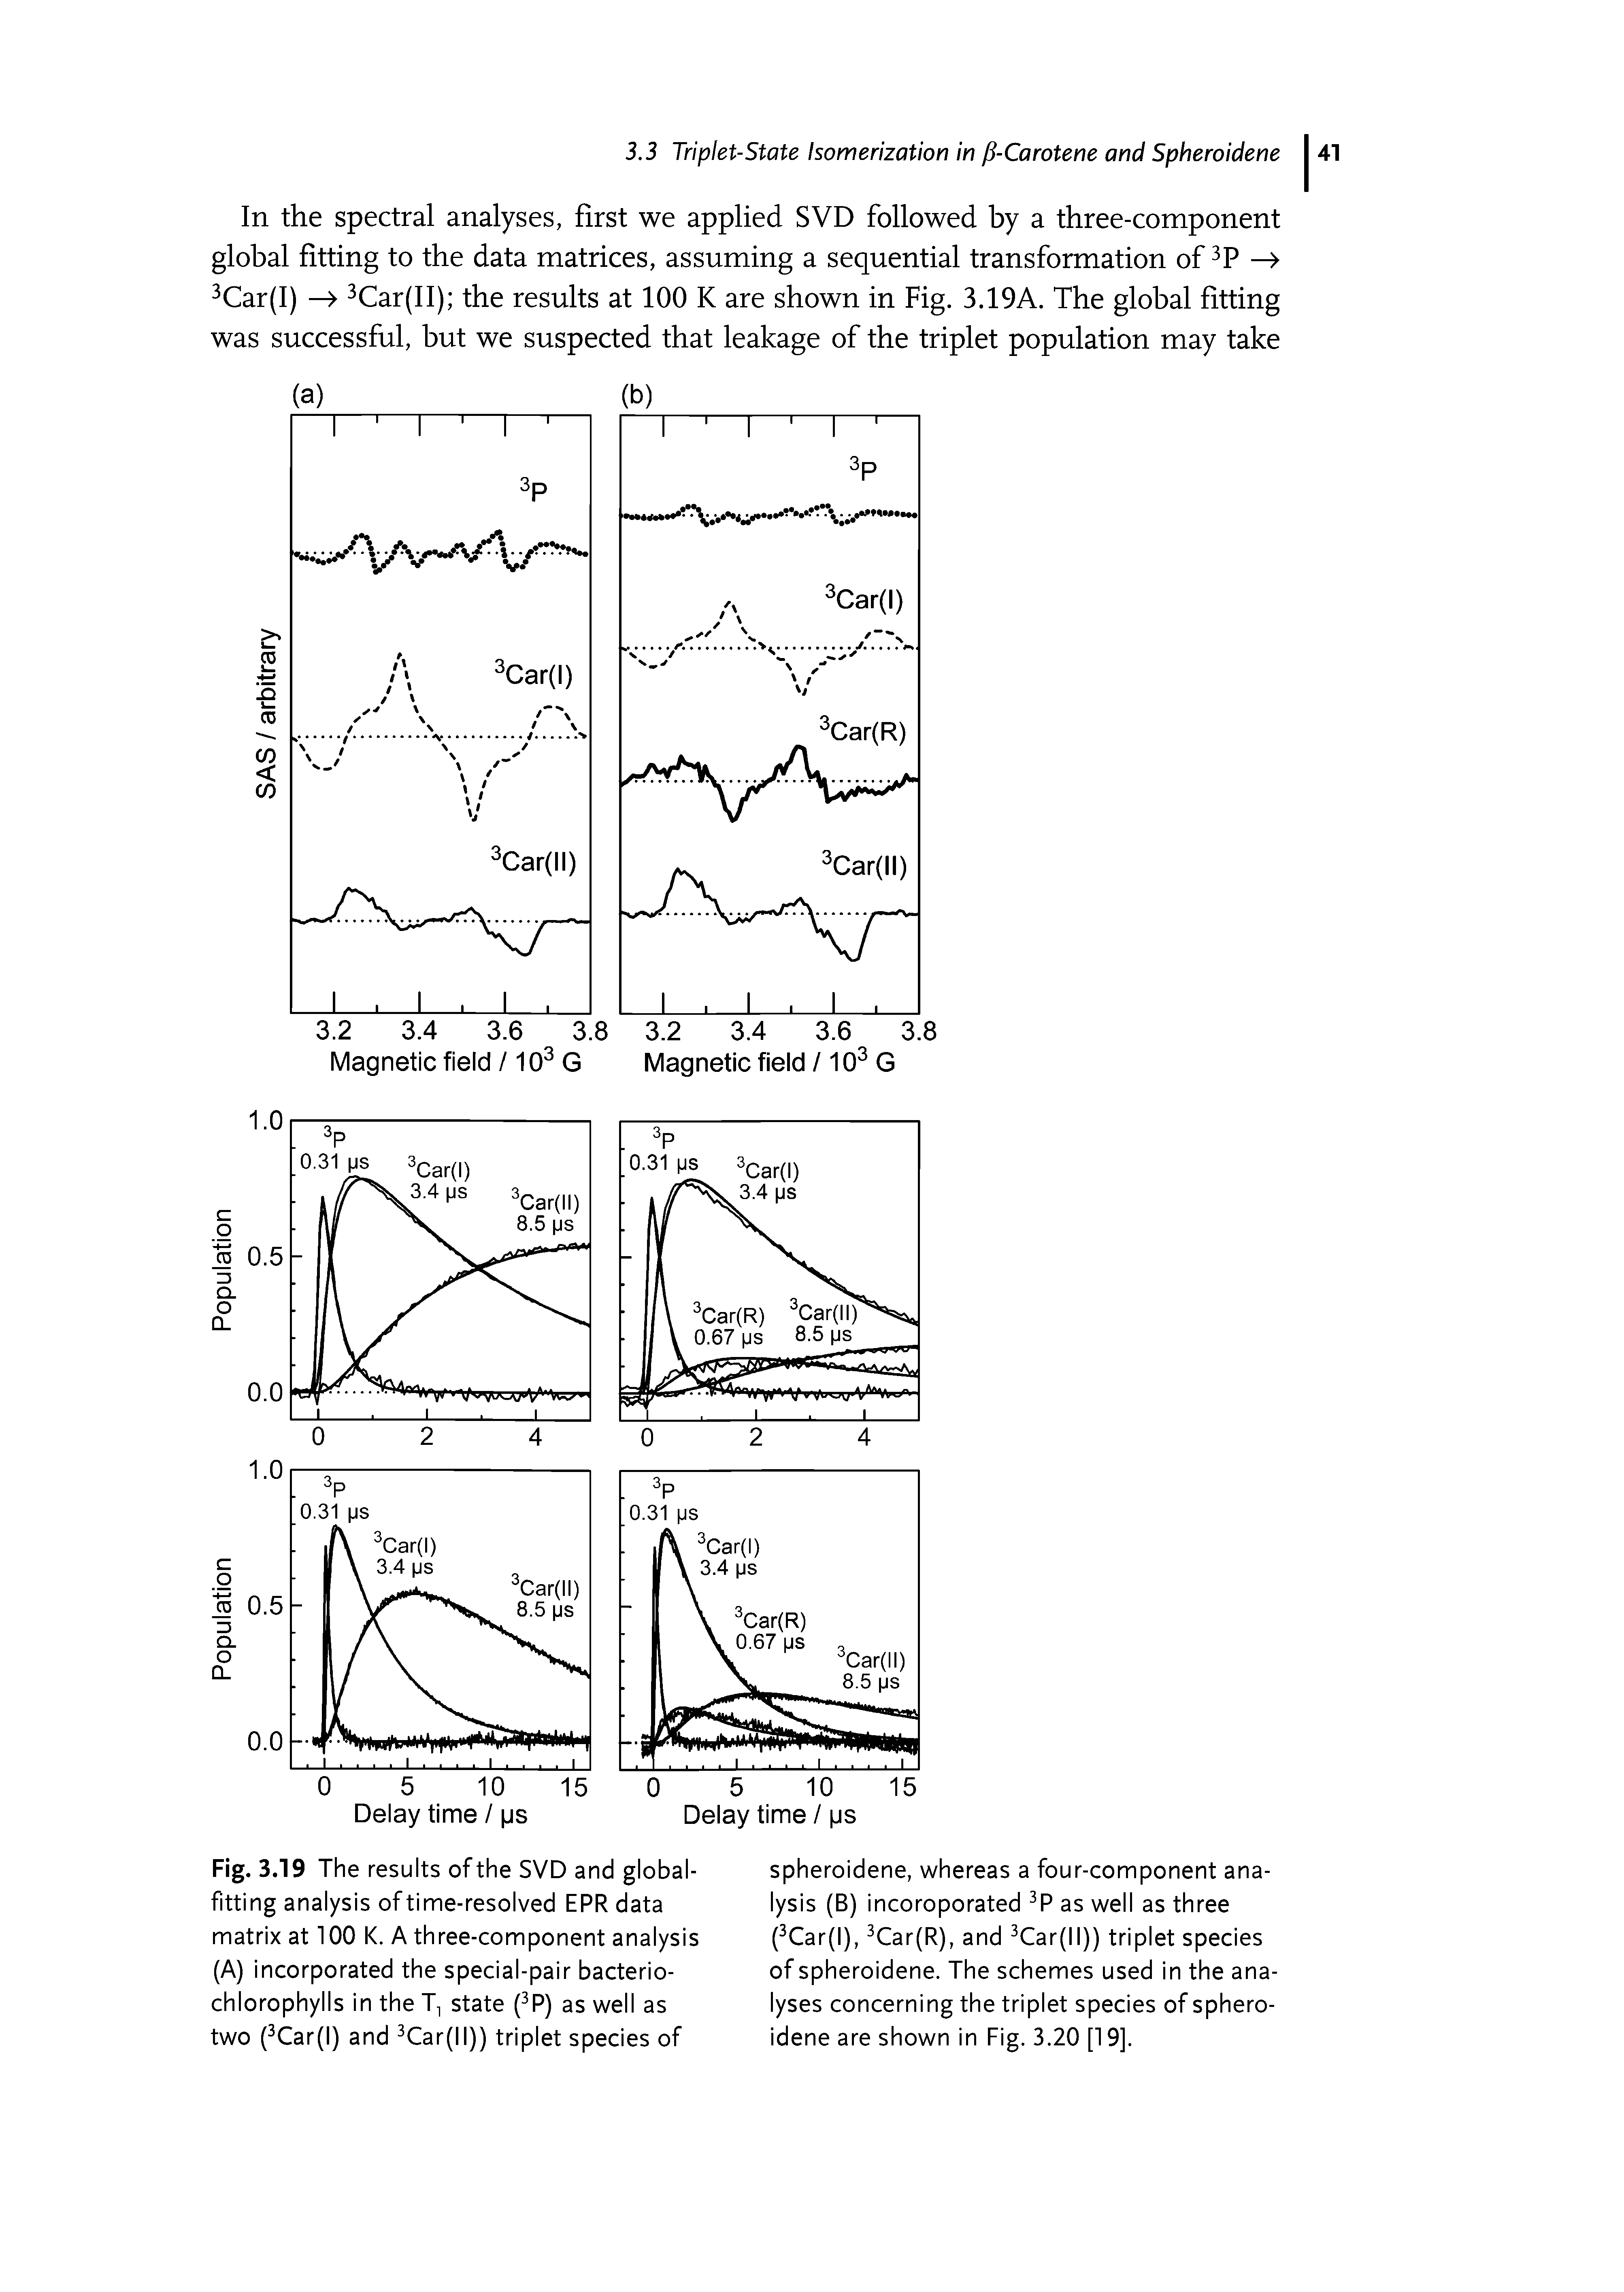 Fig. 3.19 The results of the SVD and global-fitting analysis of time-resolved EPR data matrix at 100 K. A three-component analysis (A) incorporated the special-pair bacterio-chlorophylls in the T state (3P) as well as two (3Car(l) and 3Car(ll)) triplet species of...